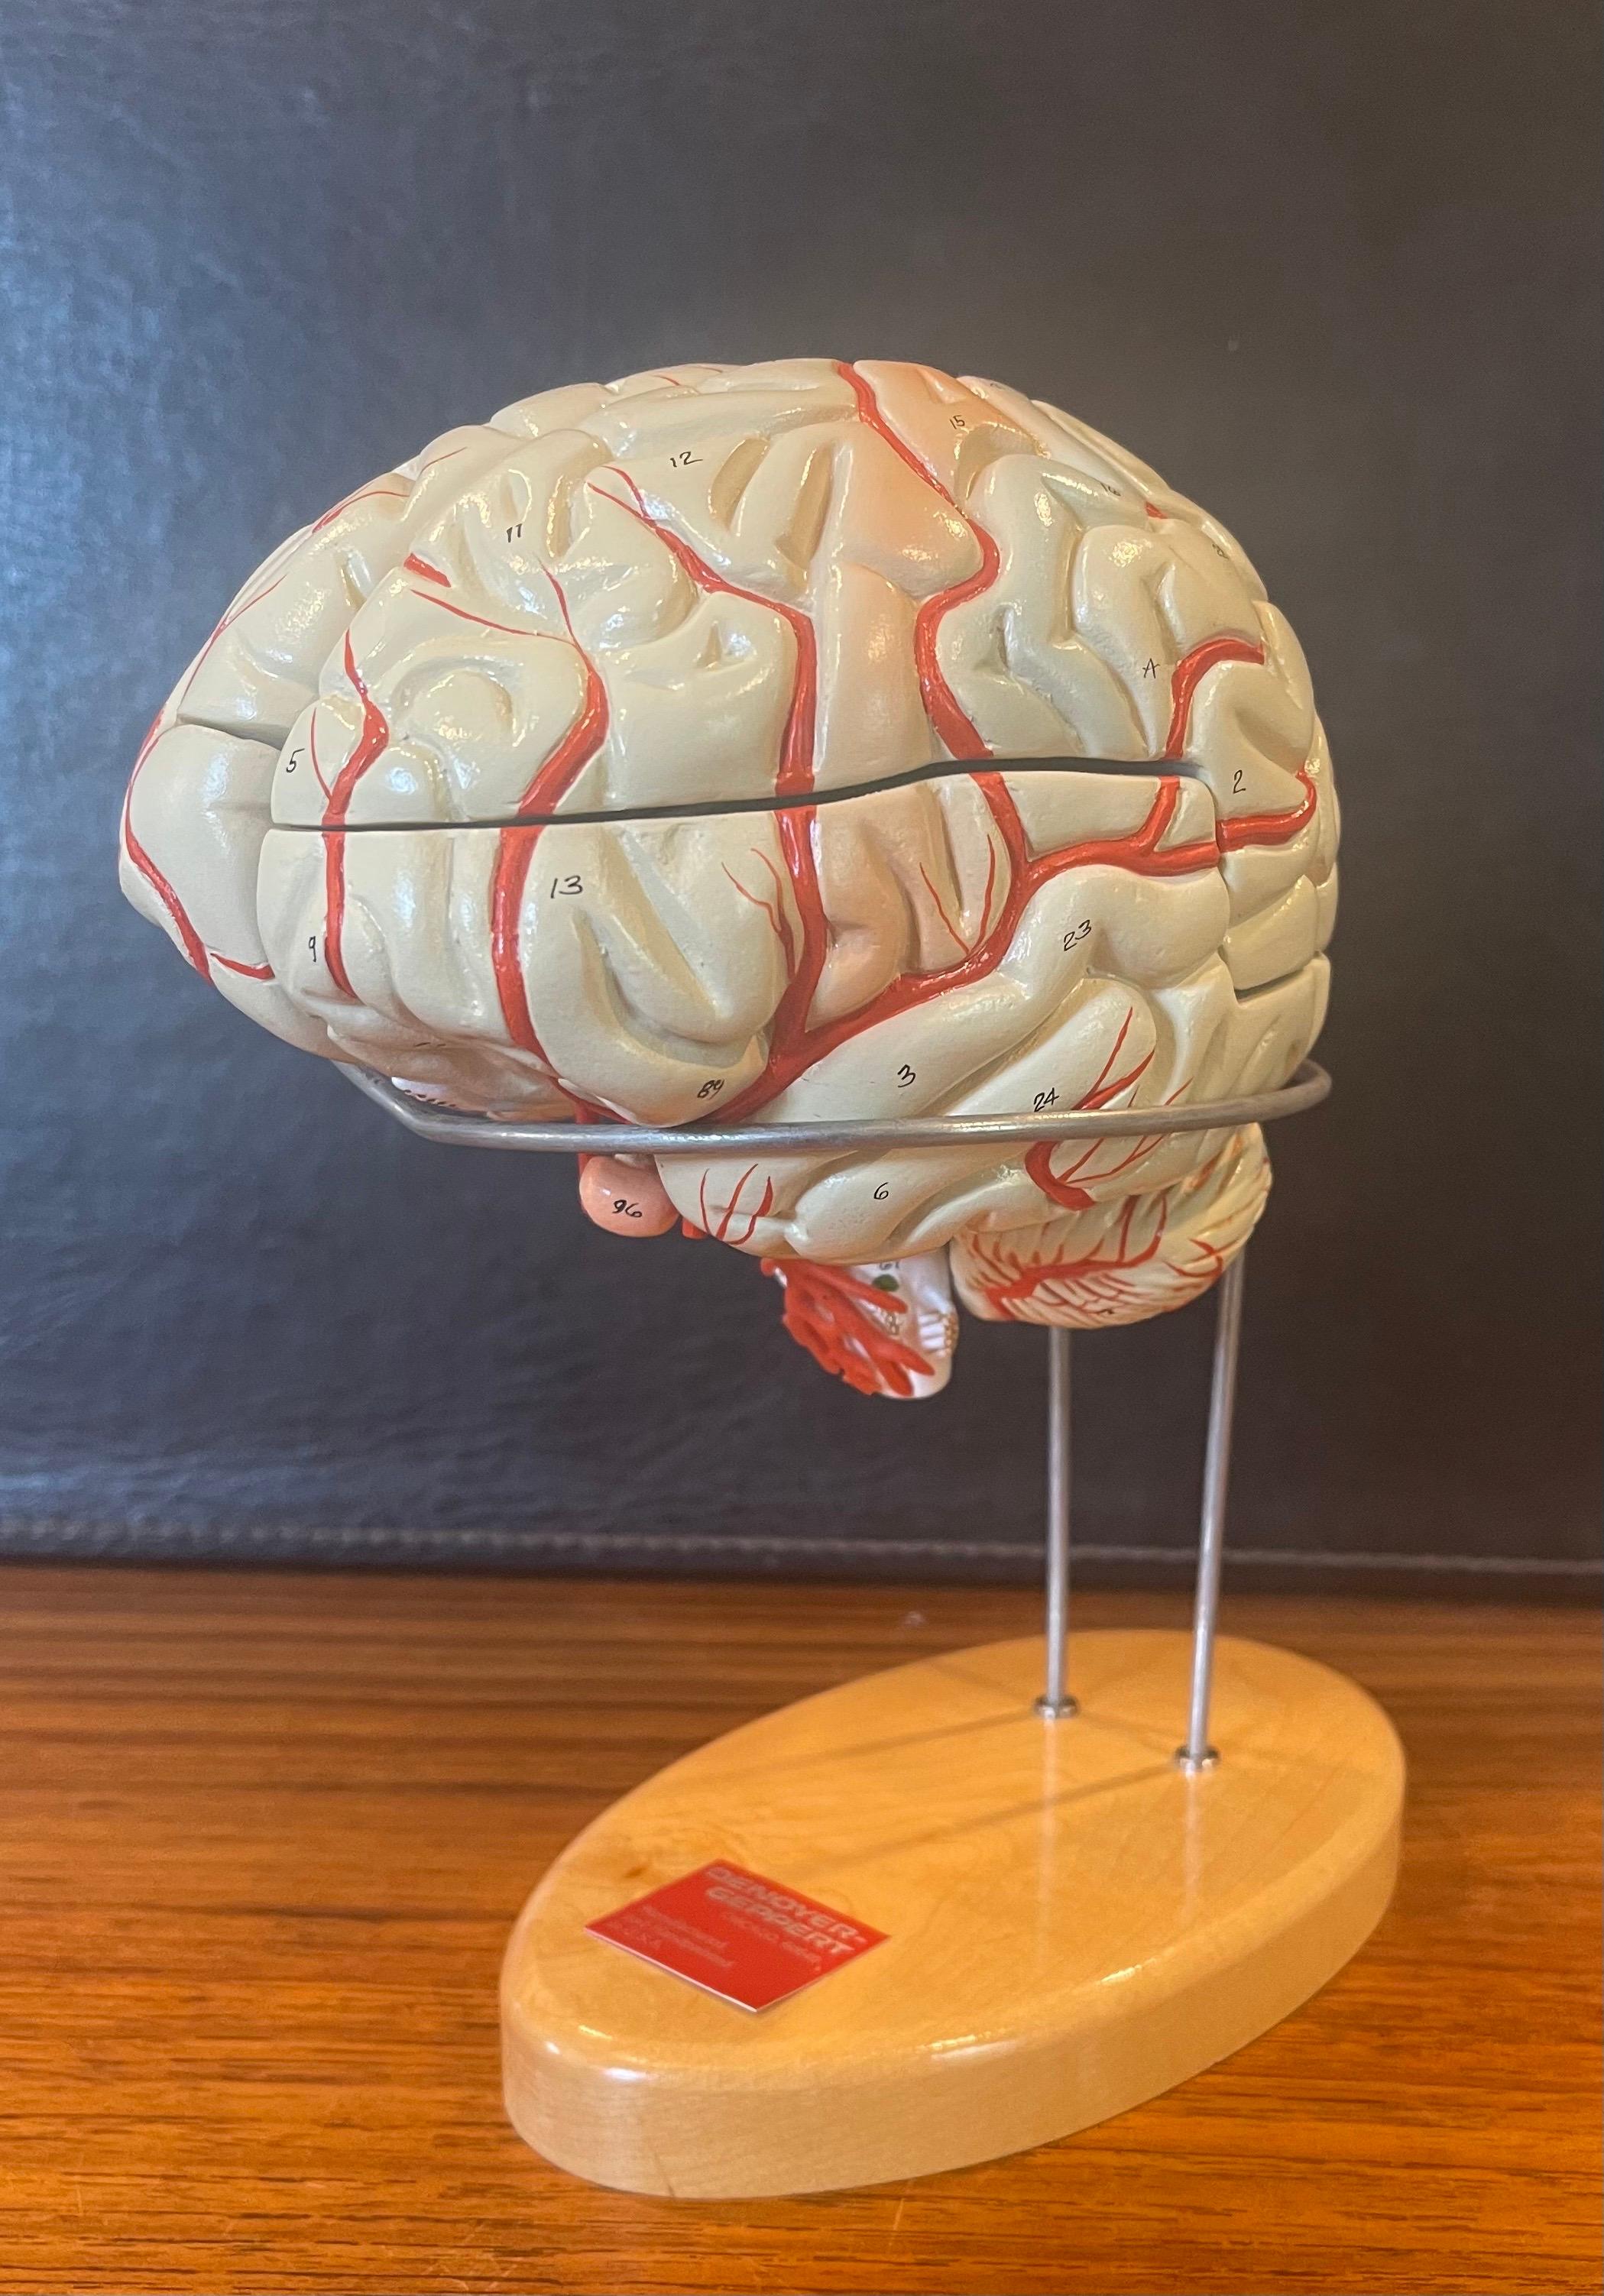 Vintage Hand-Painted Brain Model by Denoyer Geppert For Sale 2